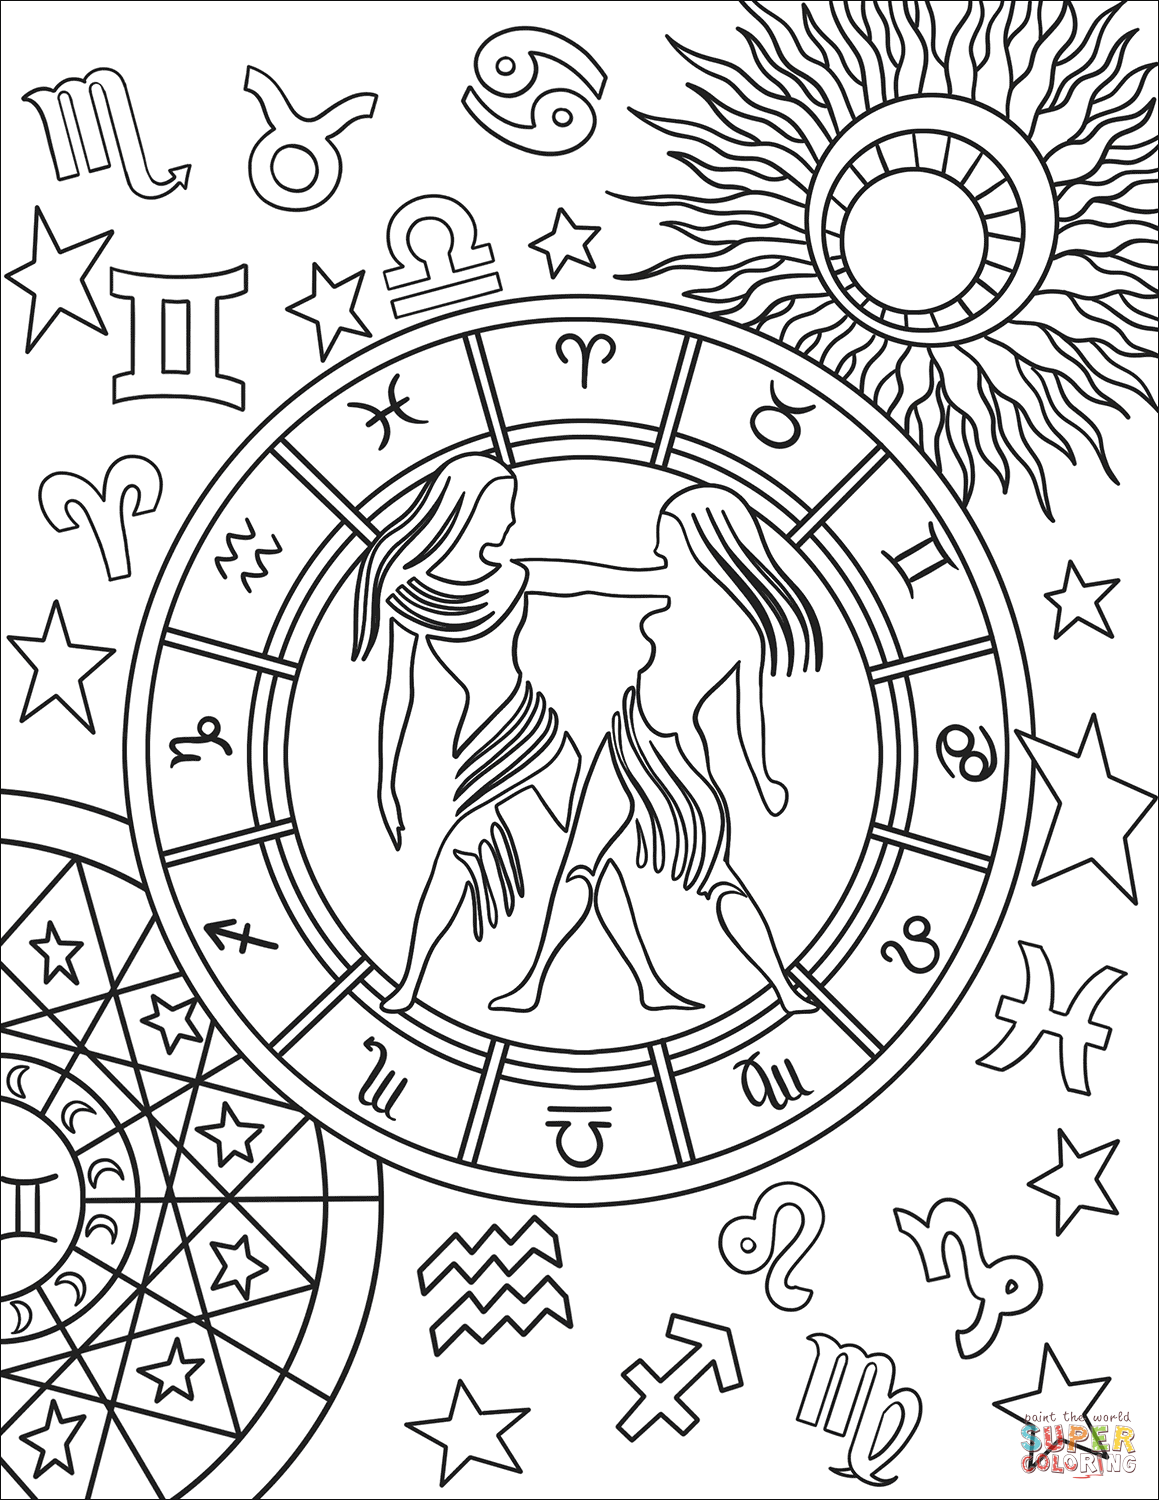 Gemini Zodiac Sign coloring page | Free Printable Coloring Pages | Zodiac  signs colors, Zodiac signs gemini, Coloring pages